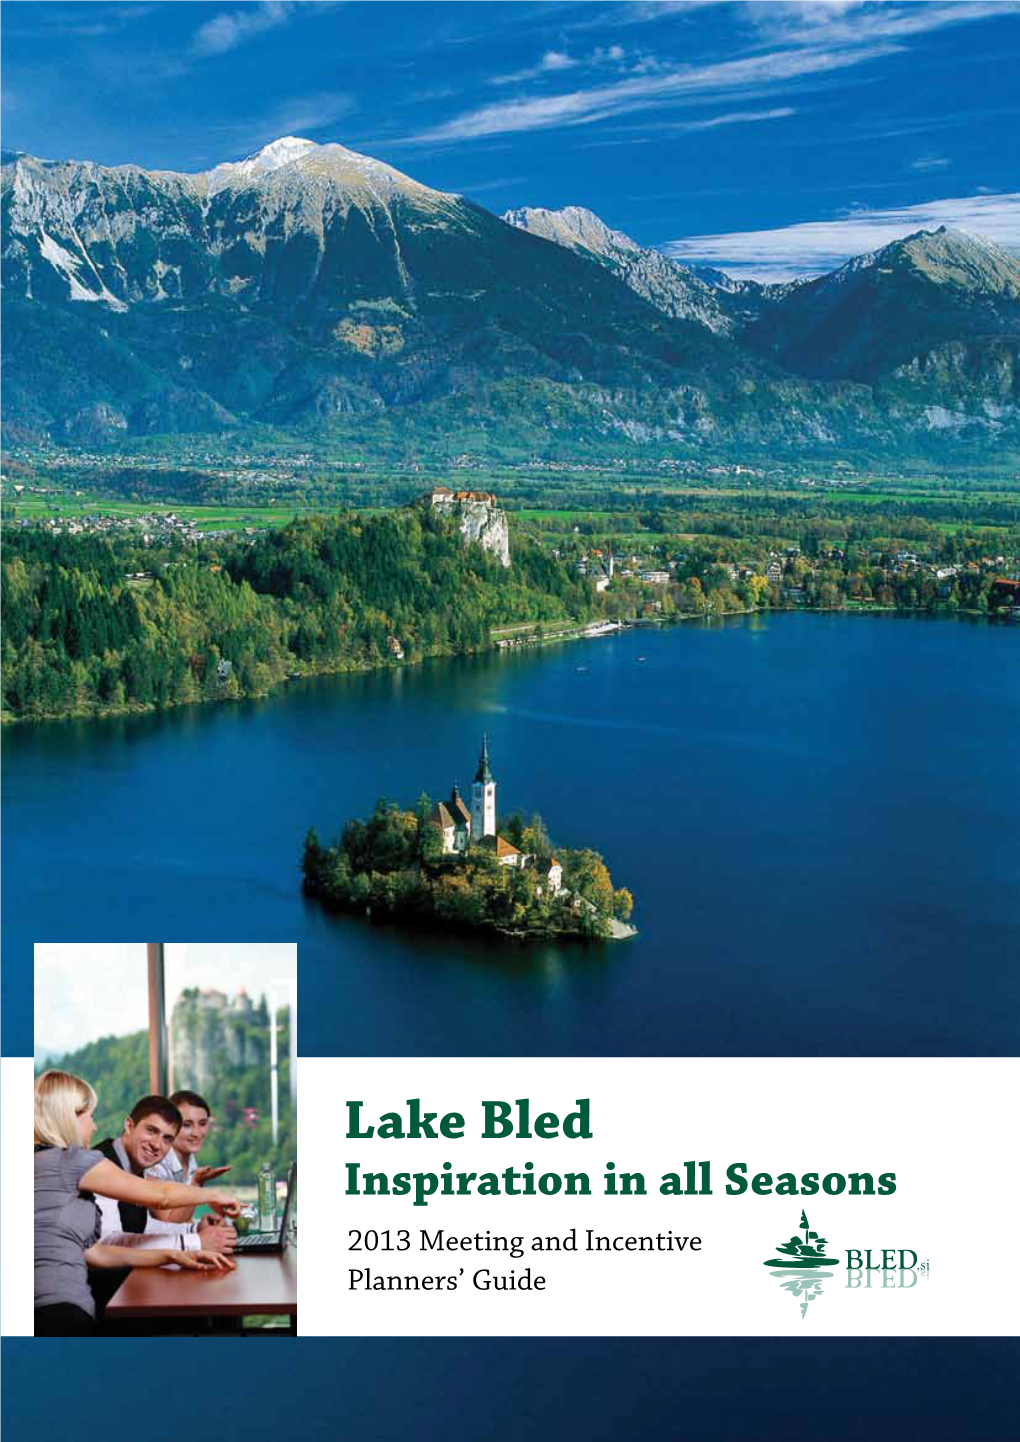 Lake Bled Inspiration in All Seasons 2013 Meeting and Incentive Planners’ Guide